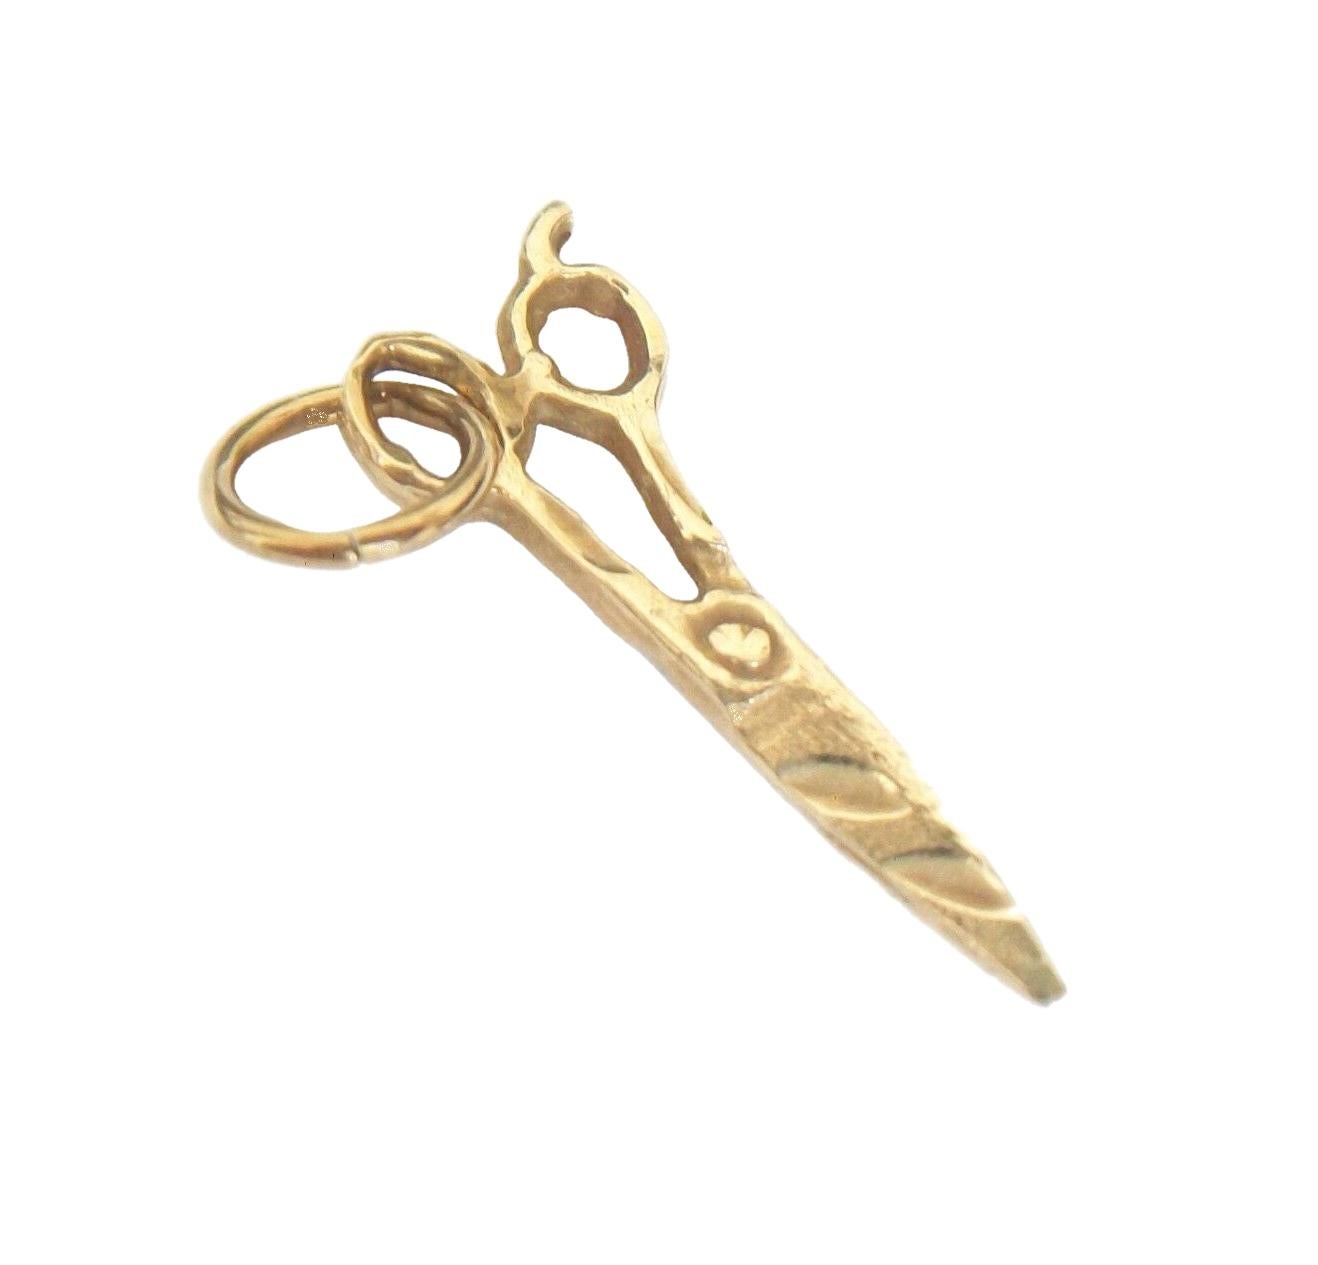 10K solid yellow gold 'scissors' charm - signed (AKB - ARMANDOR) - Canada - late 20th century.

Excellent pre-owned condition - un-soldered bail - no loss - no damage - no repairs - minor signs of use. 

Size/Dimensions - 3/4